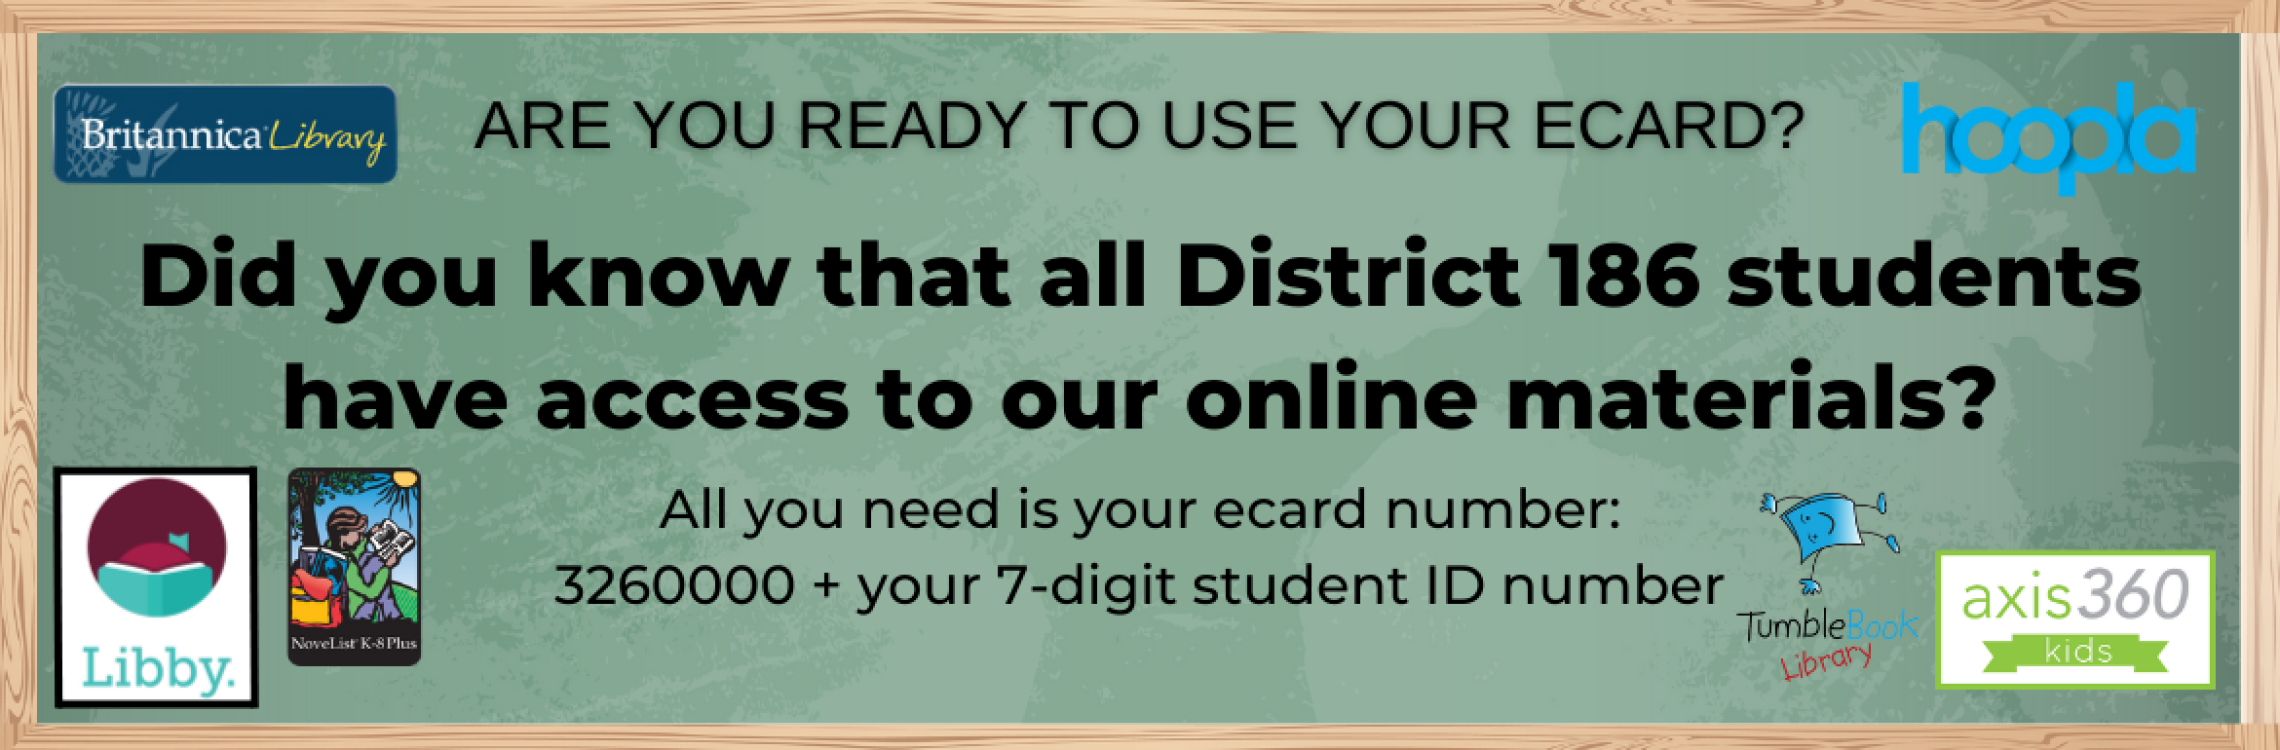 Did you know all District 186 students have access to our online materials? 